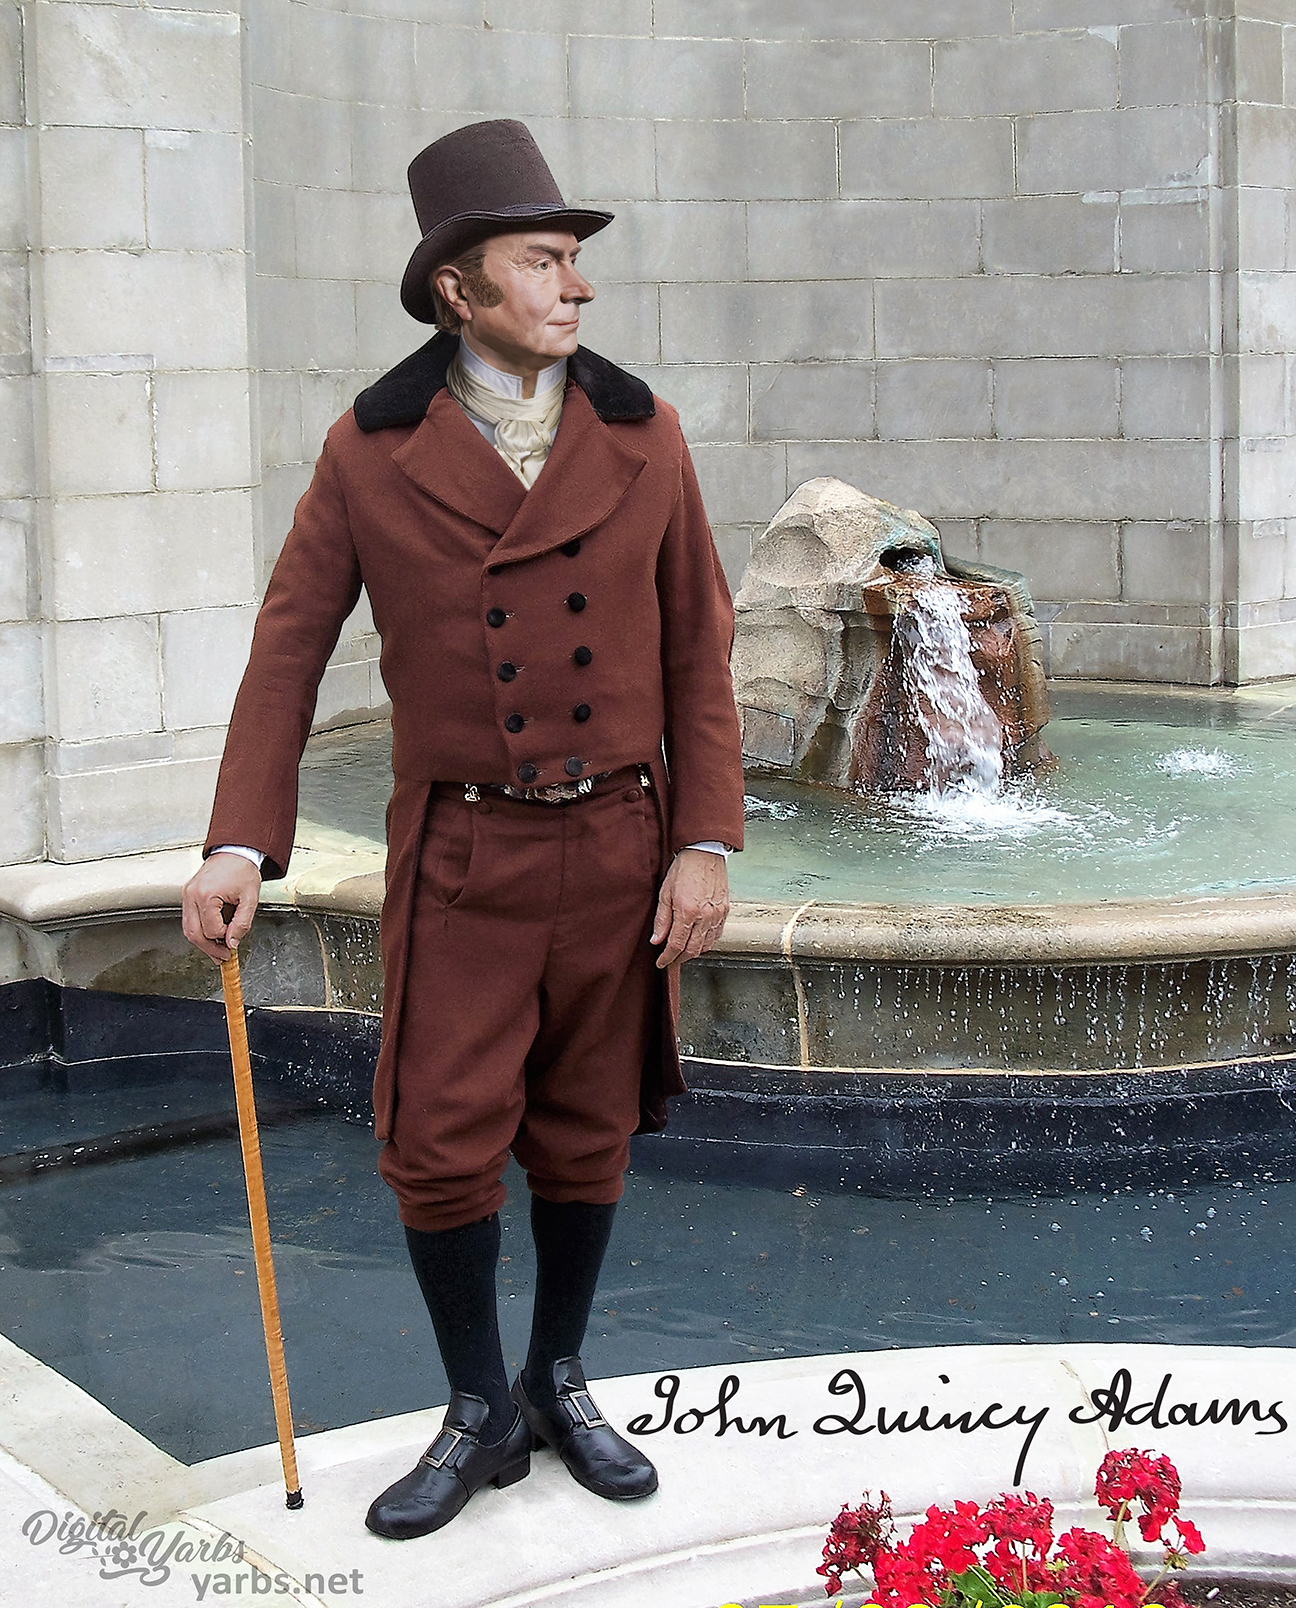 John Quincy Adams standing by a water fountain